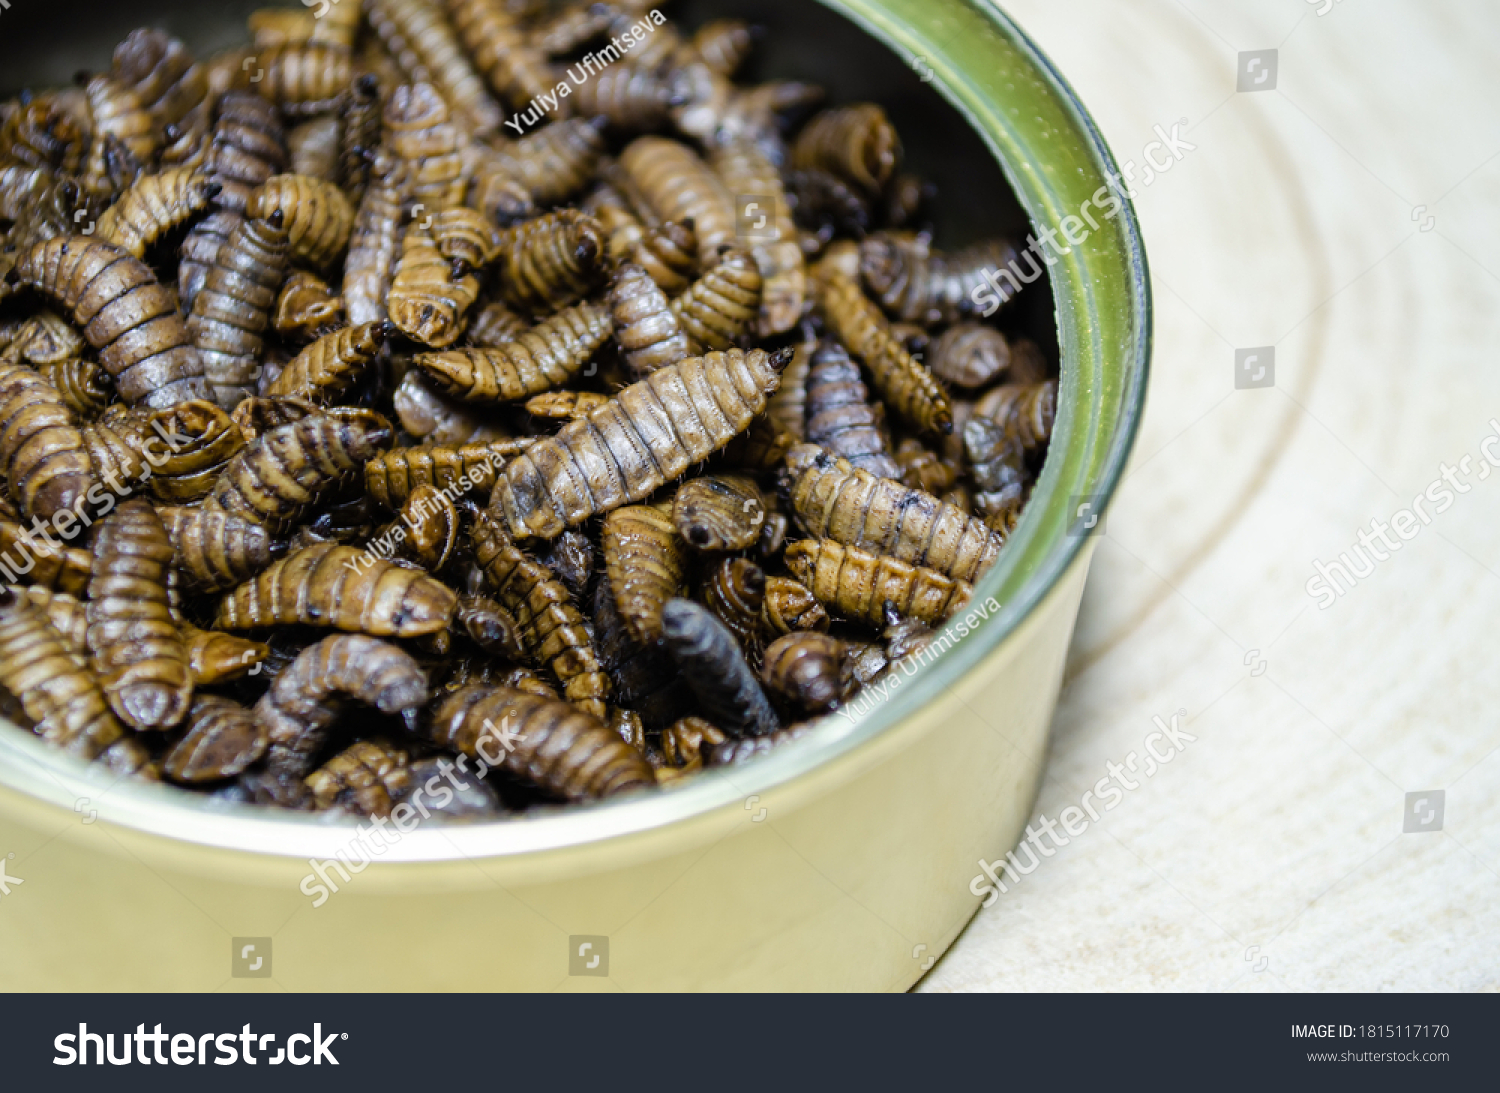 Food for reptiles and animals. Preserved larvae of Hermetia illucens, black soldier fly. #1815117170